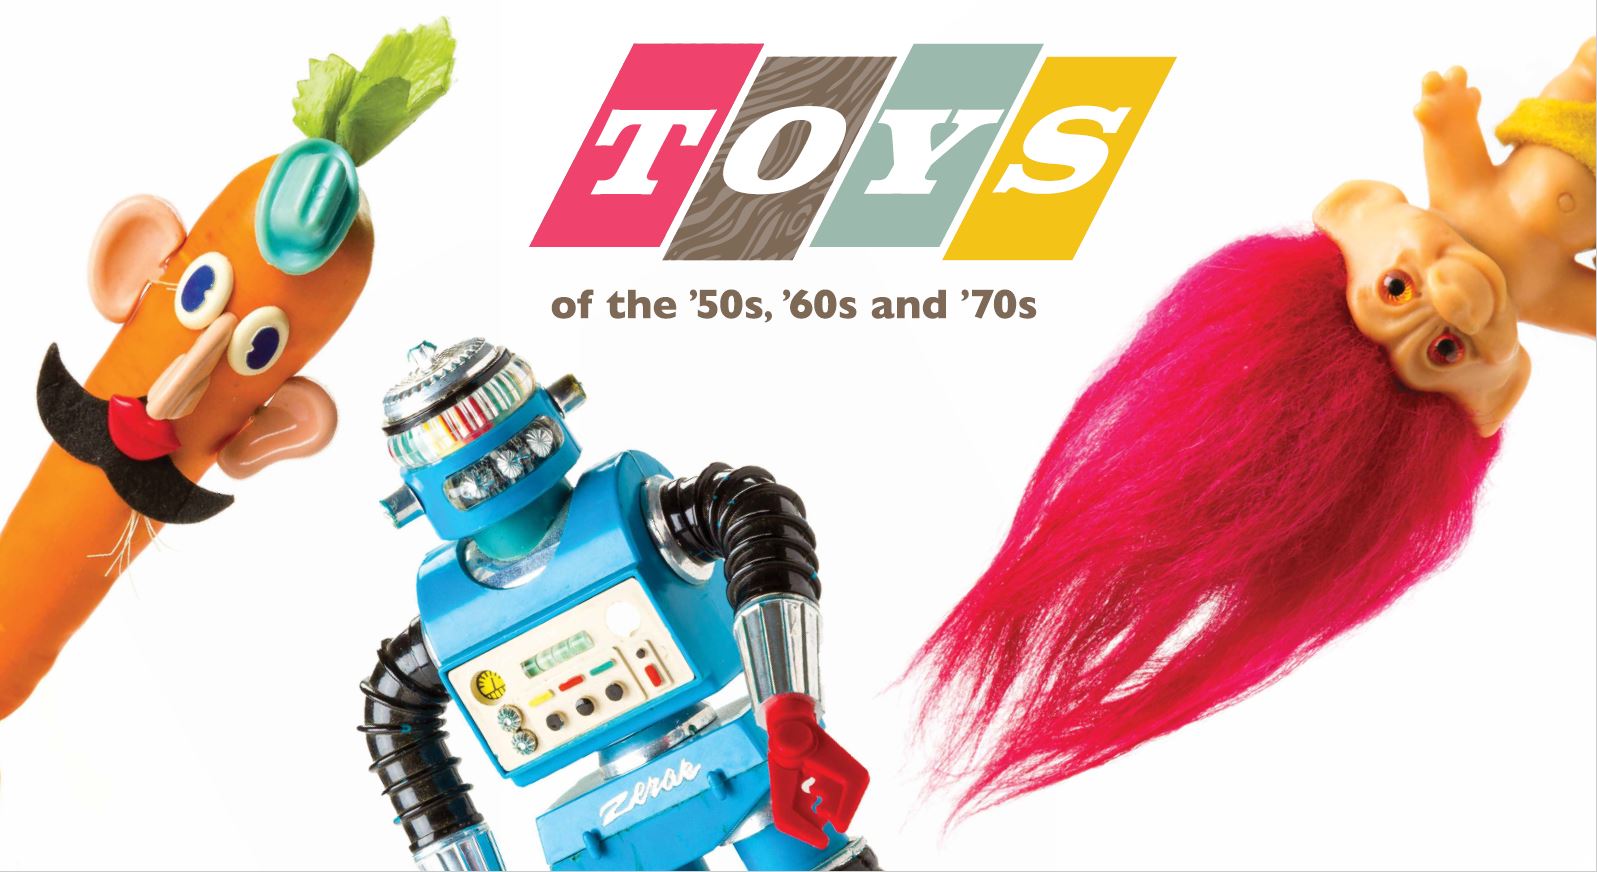 An image of Mr. Potato Head pins on a carrot, a toy robot, and a toy Troll doll with pink hair around the words "Toys of the '50s, '60s, and '70s"